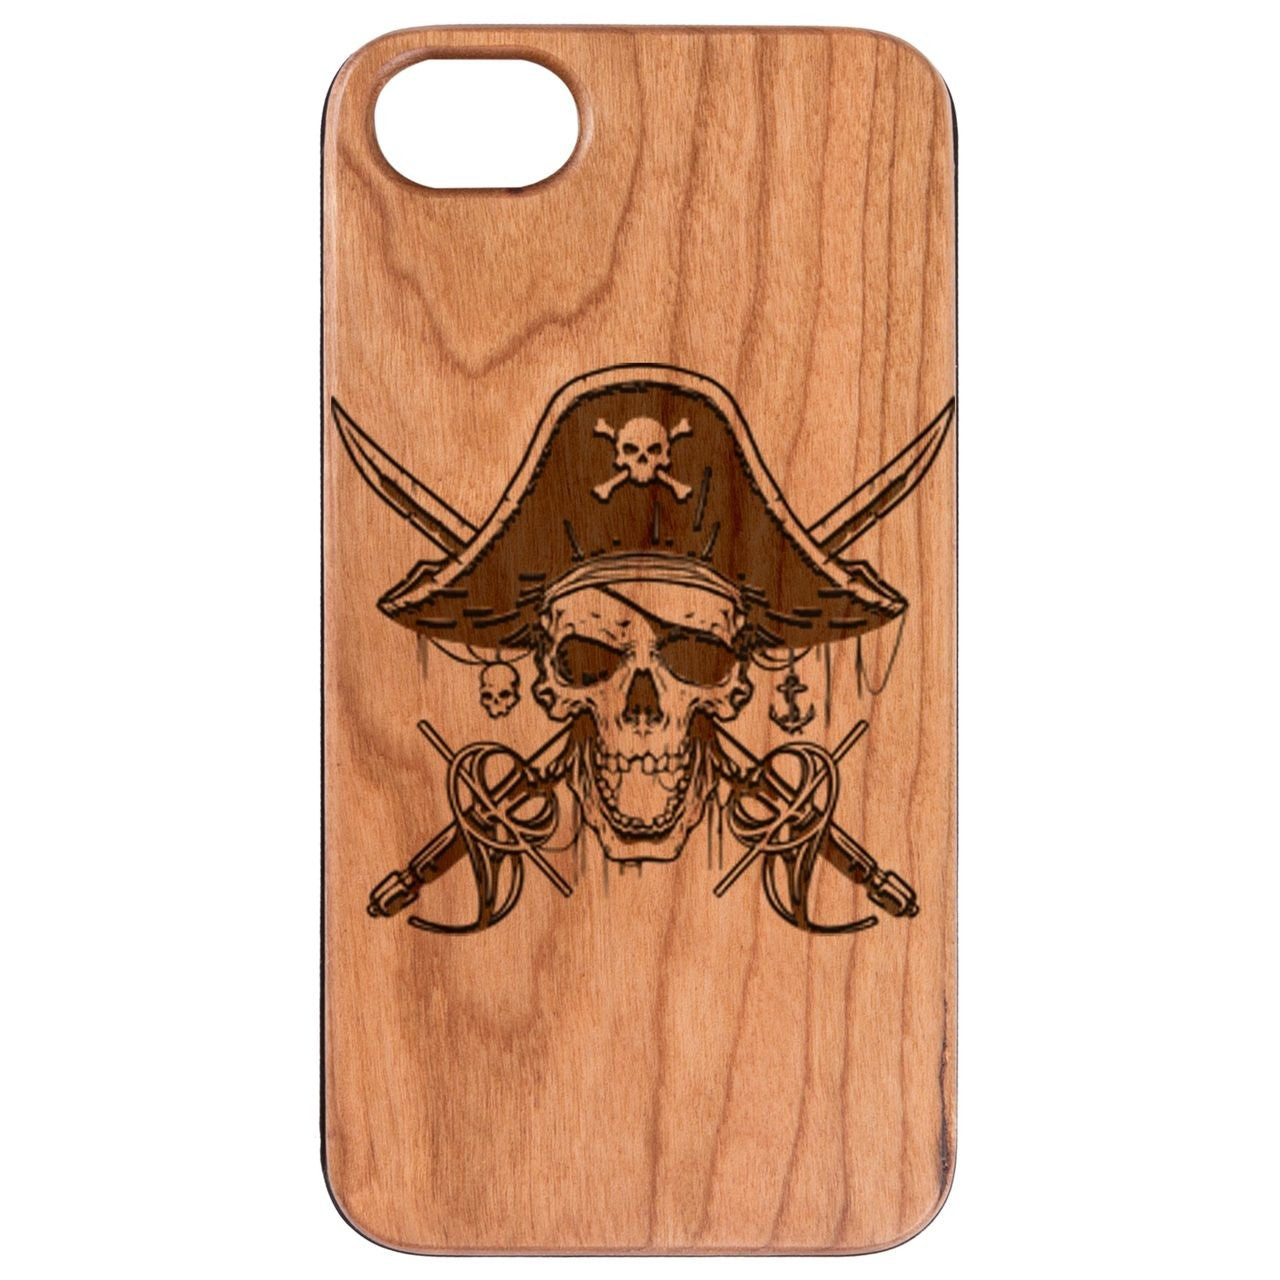  Pirate Skull - Engraved - Wooden Phone Case - IPhone 13 Models